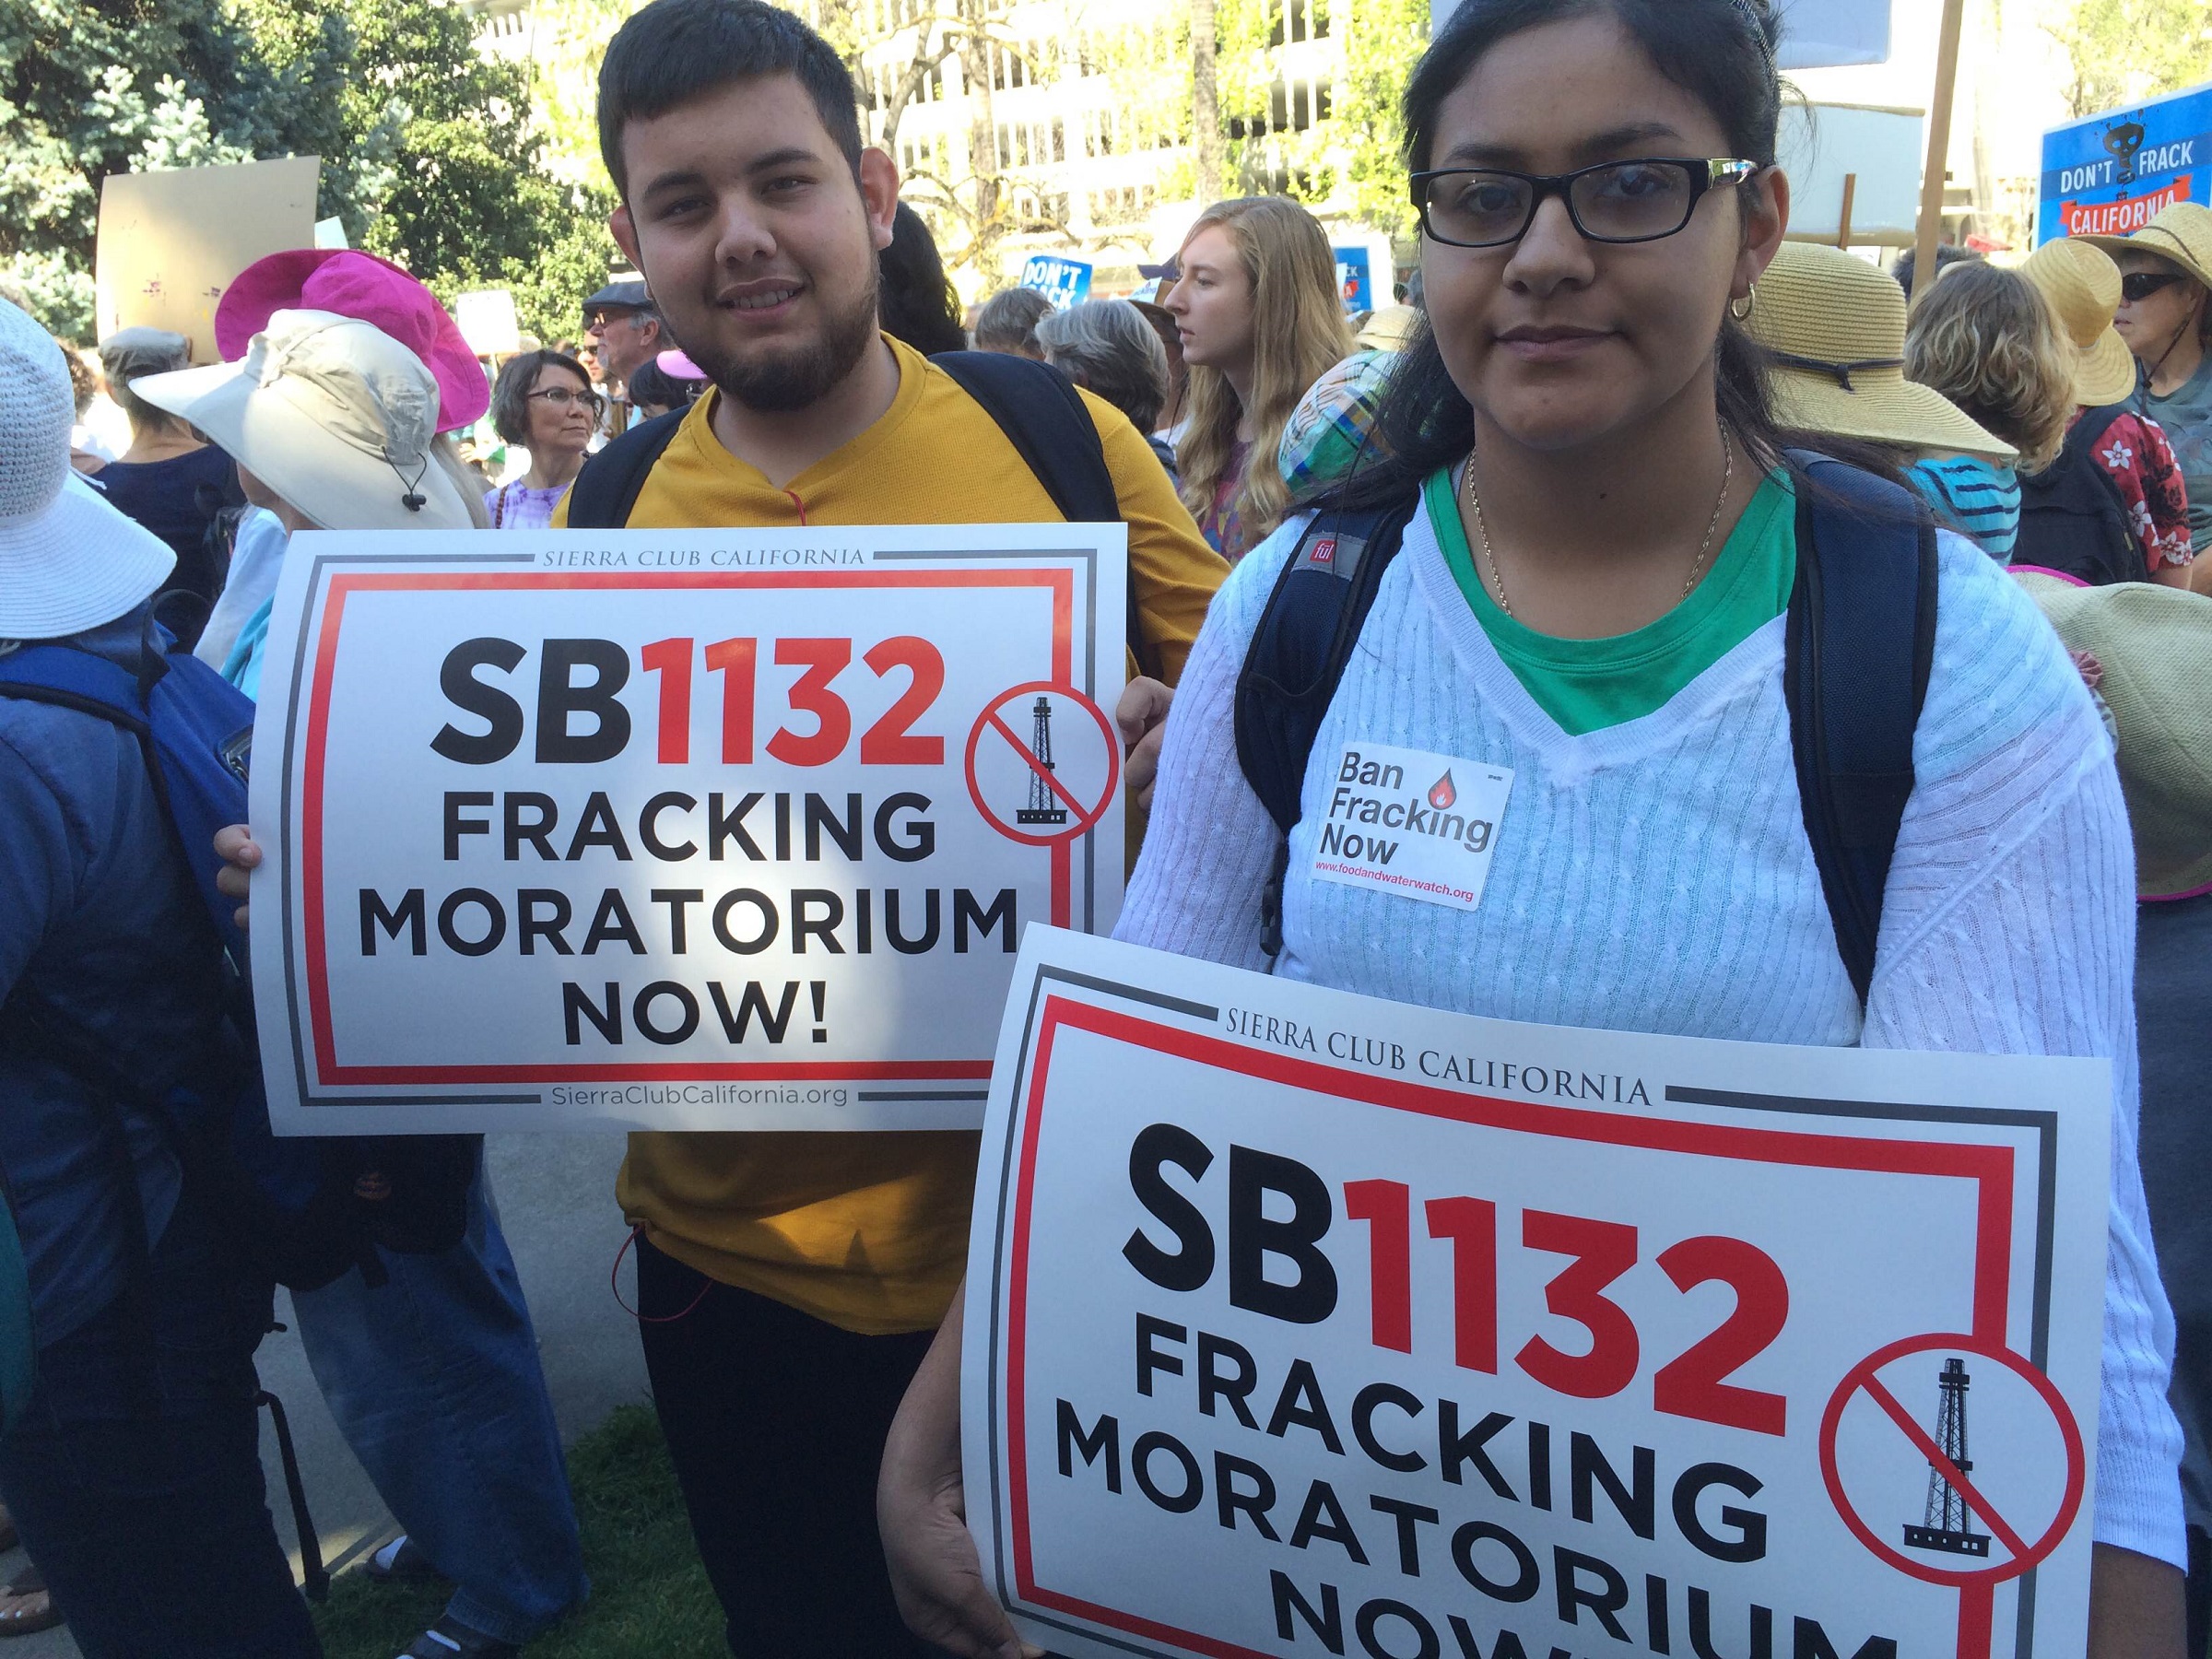 Young man and woman with determined faces holding signs for SB 1132, against fracking